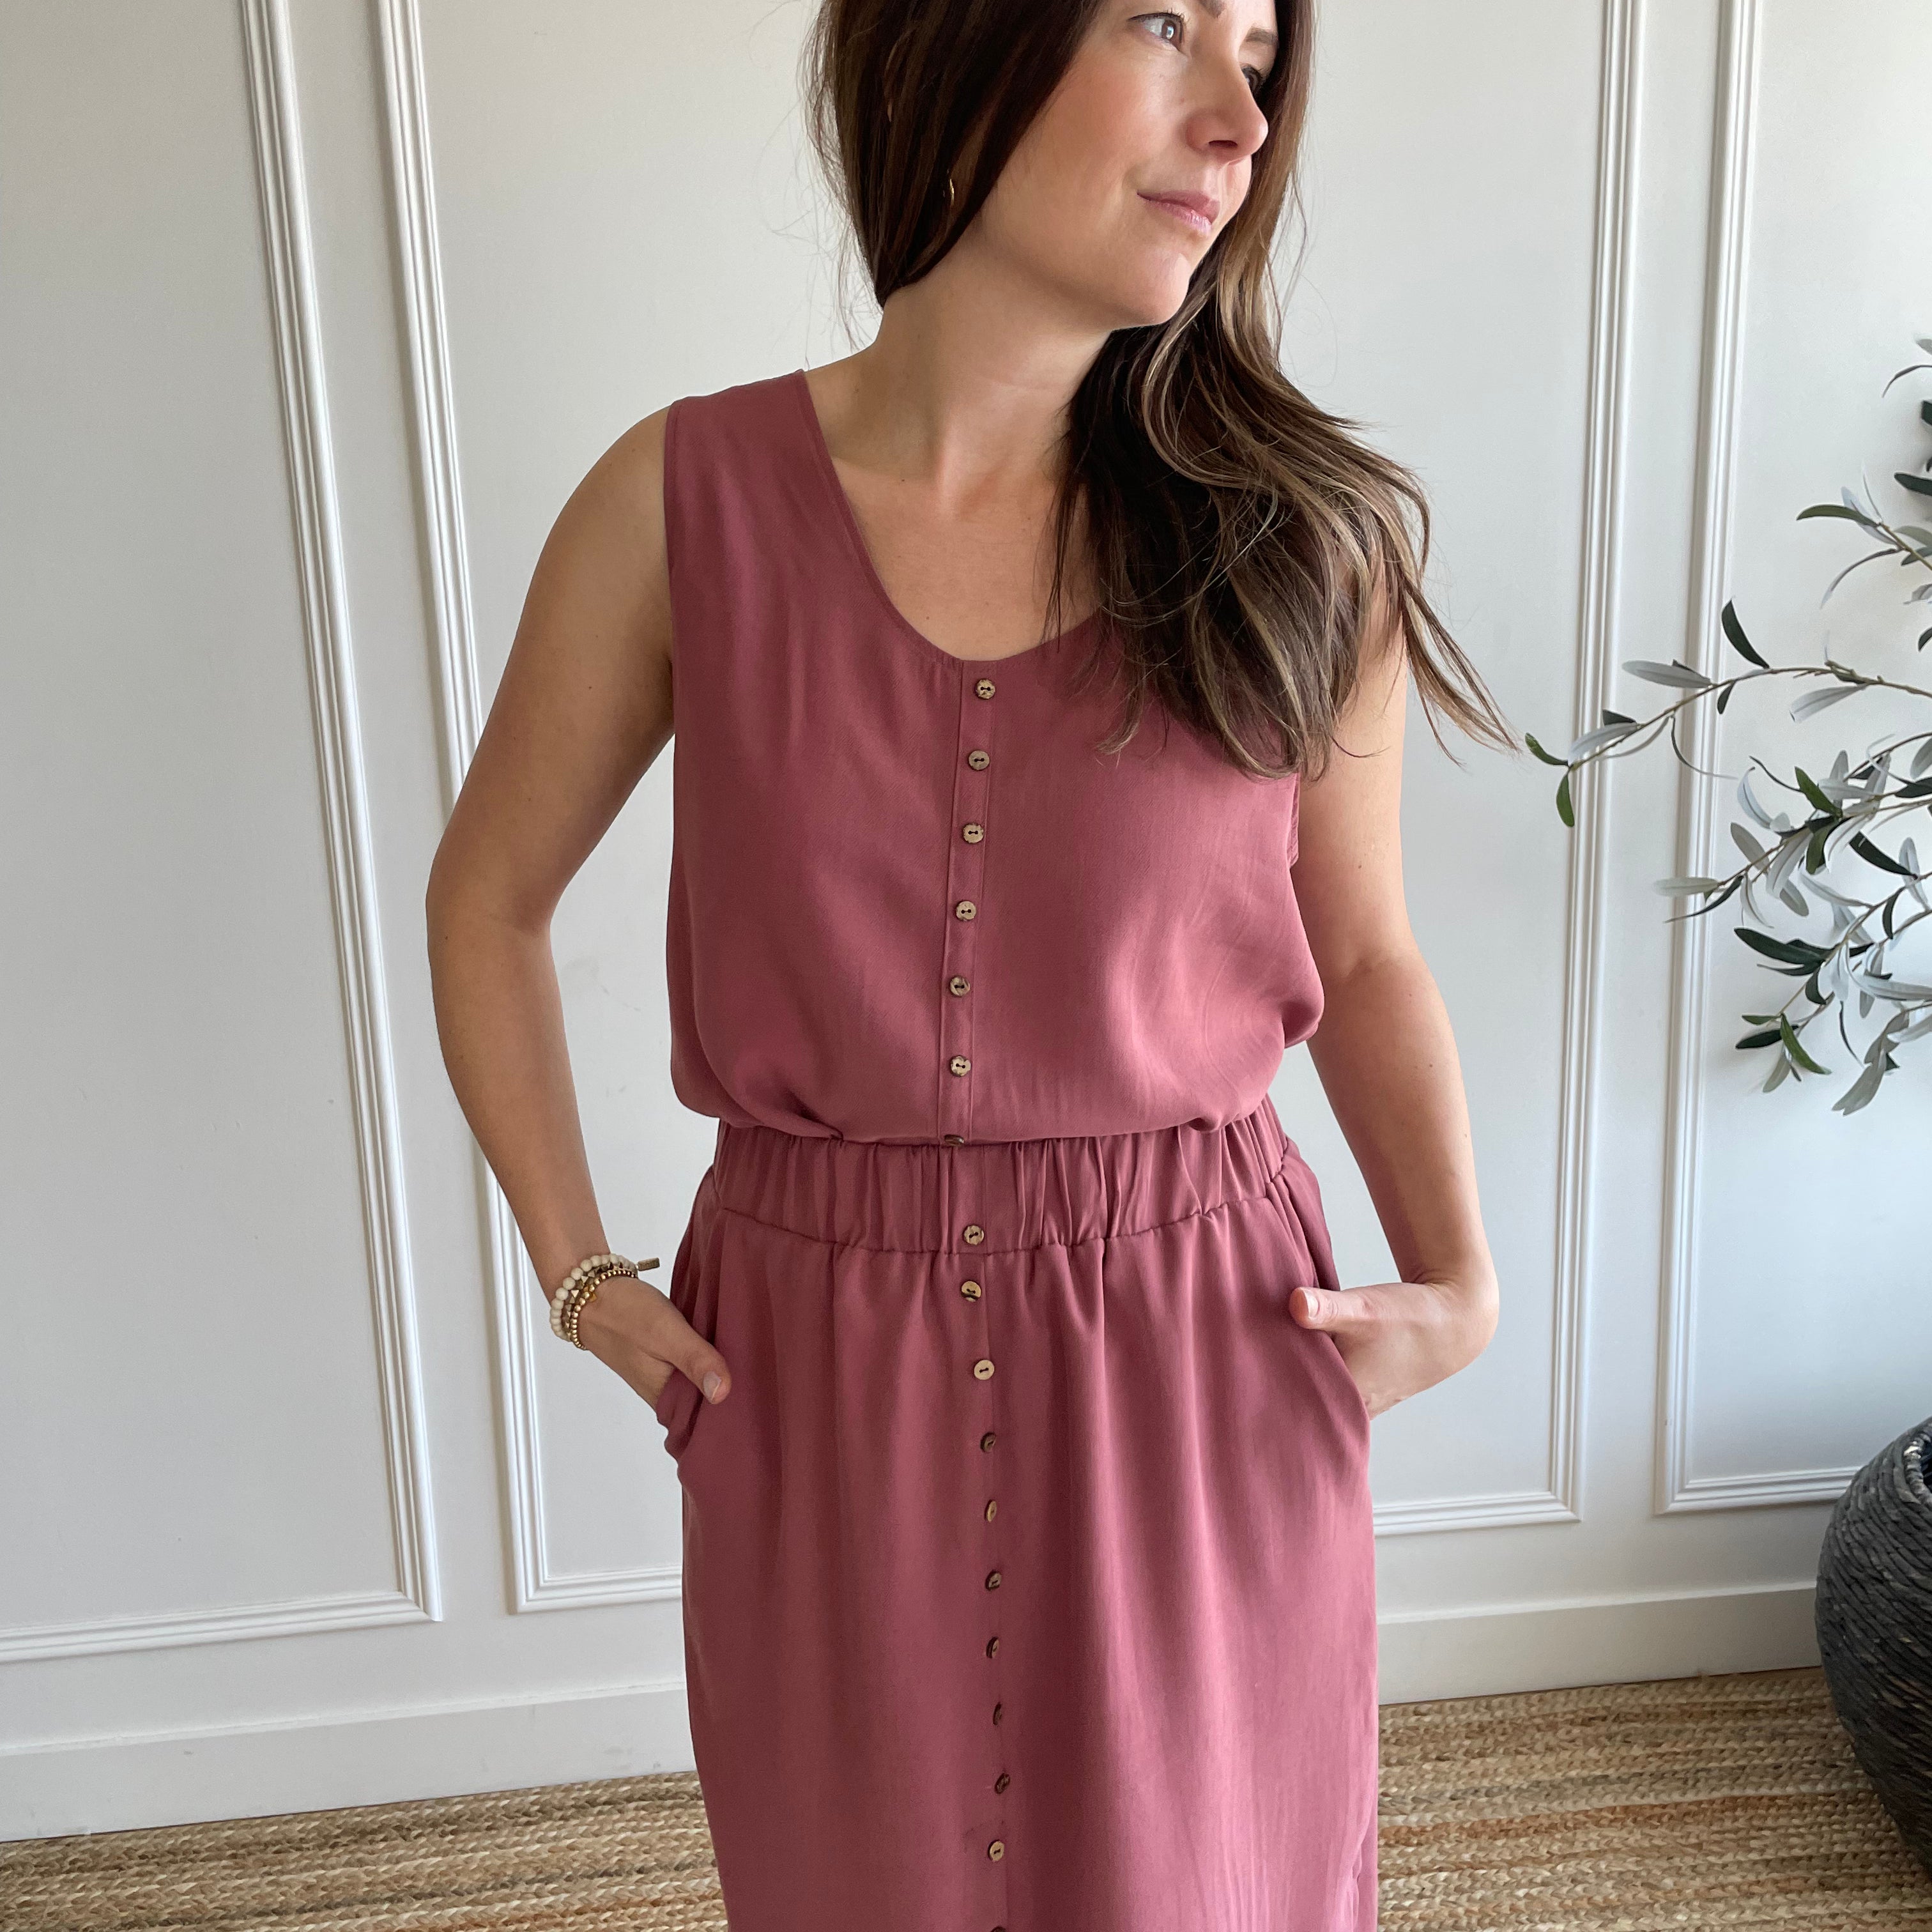 pink loose fitting women's tank top with brown buttons and pink flowy midi skirt with side slits 